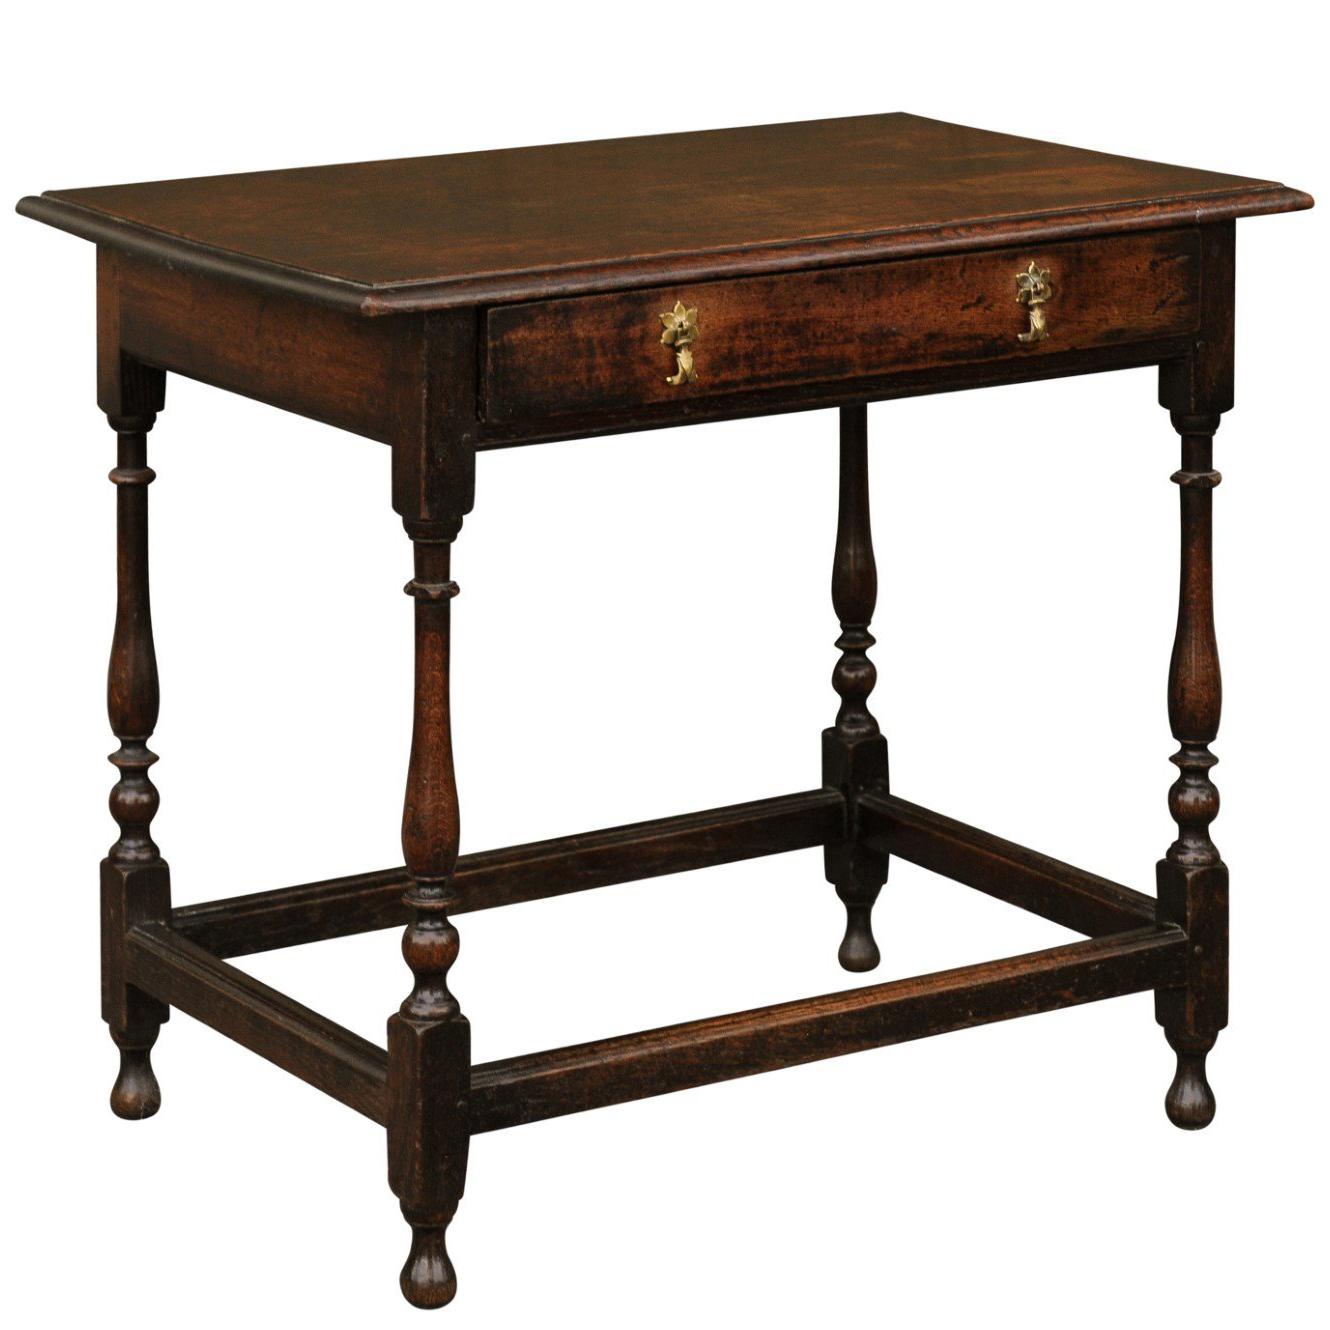 English William and Mary Style 1900s Oak Side Table with Drawer and Turned Legs